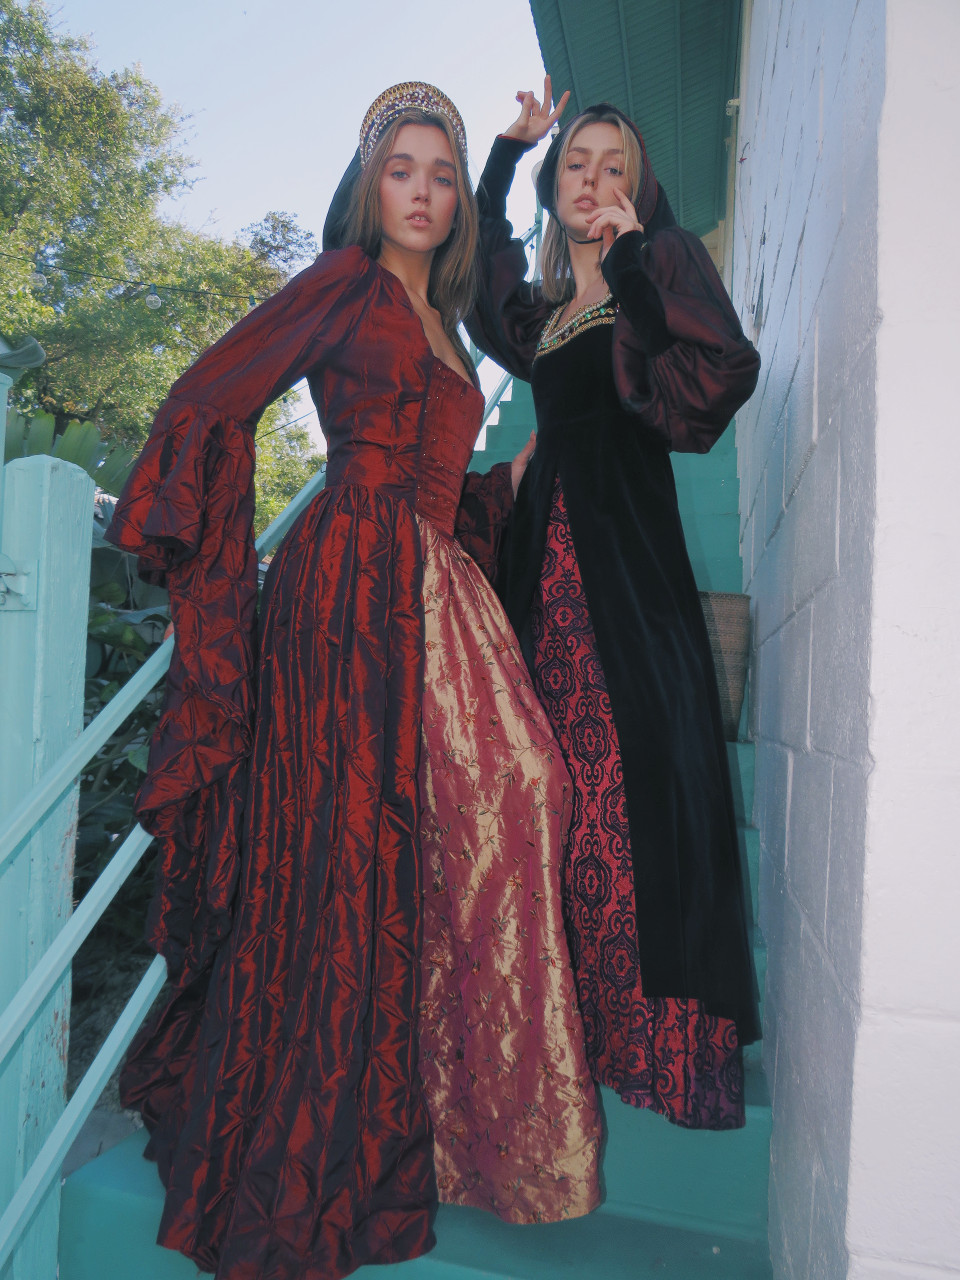 Medieval/Renaissance Costumes - Orlando Vintage Clothing and Costume